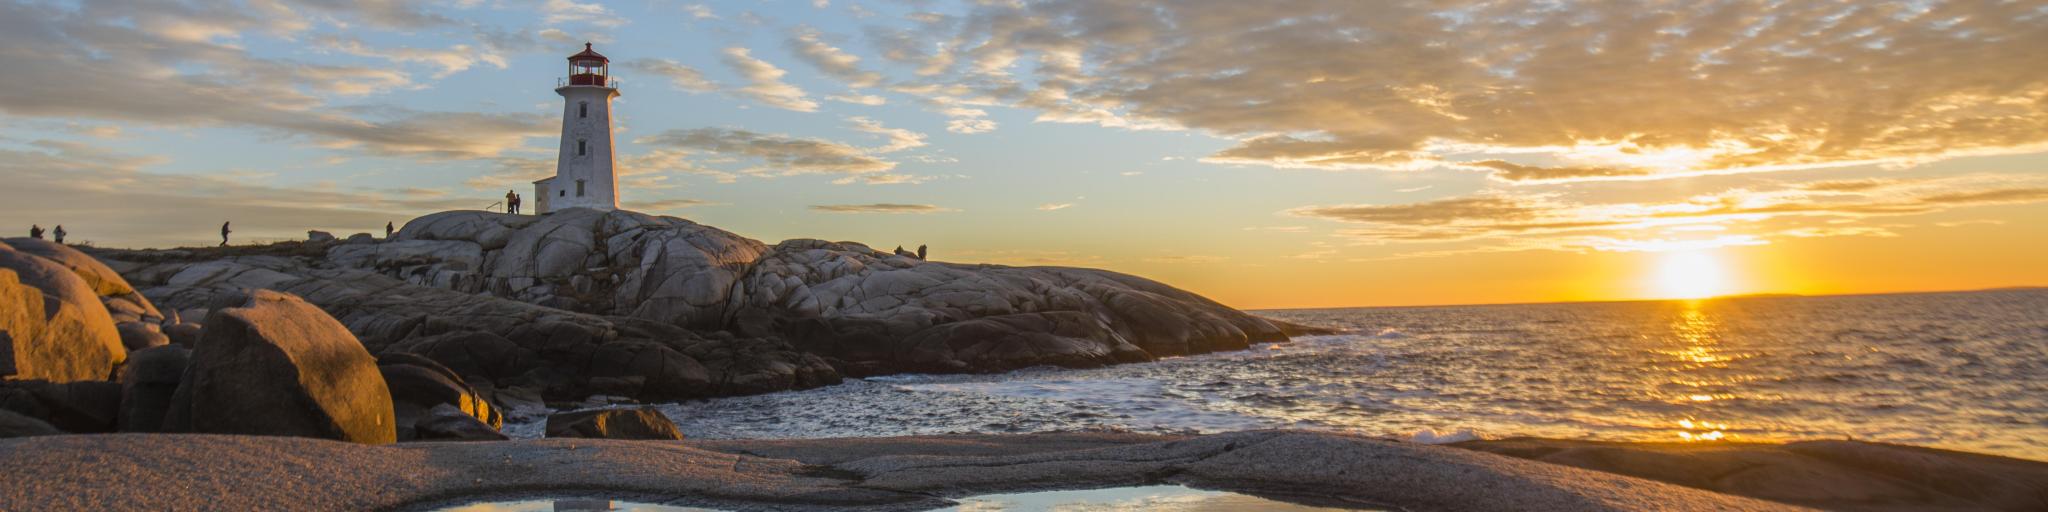 Peggy's cove lighthouse, Halifax, Nova Scotia with huge rock sunset ocean view landscape.